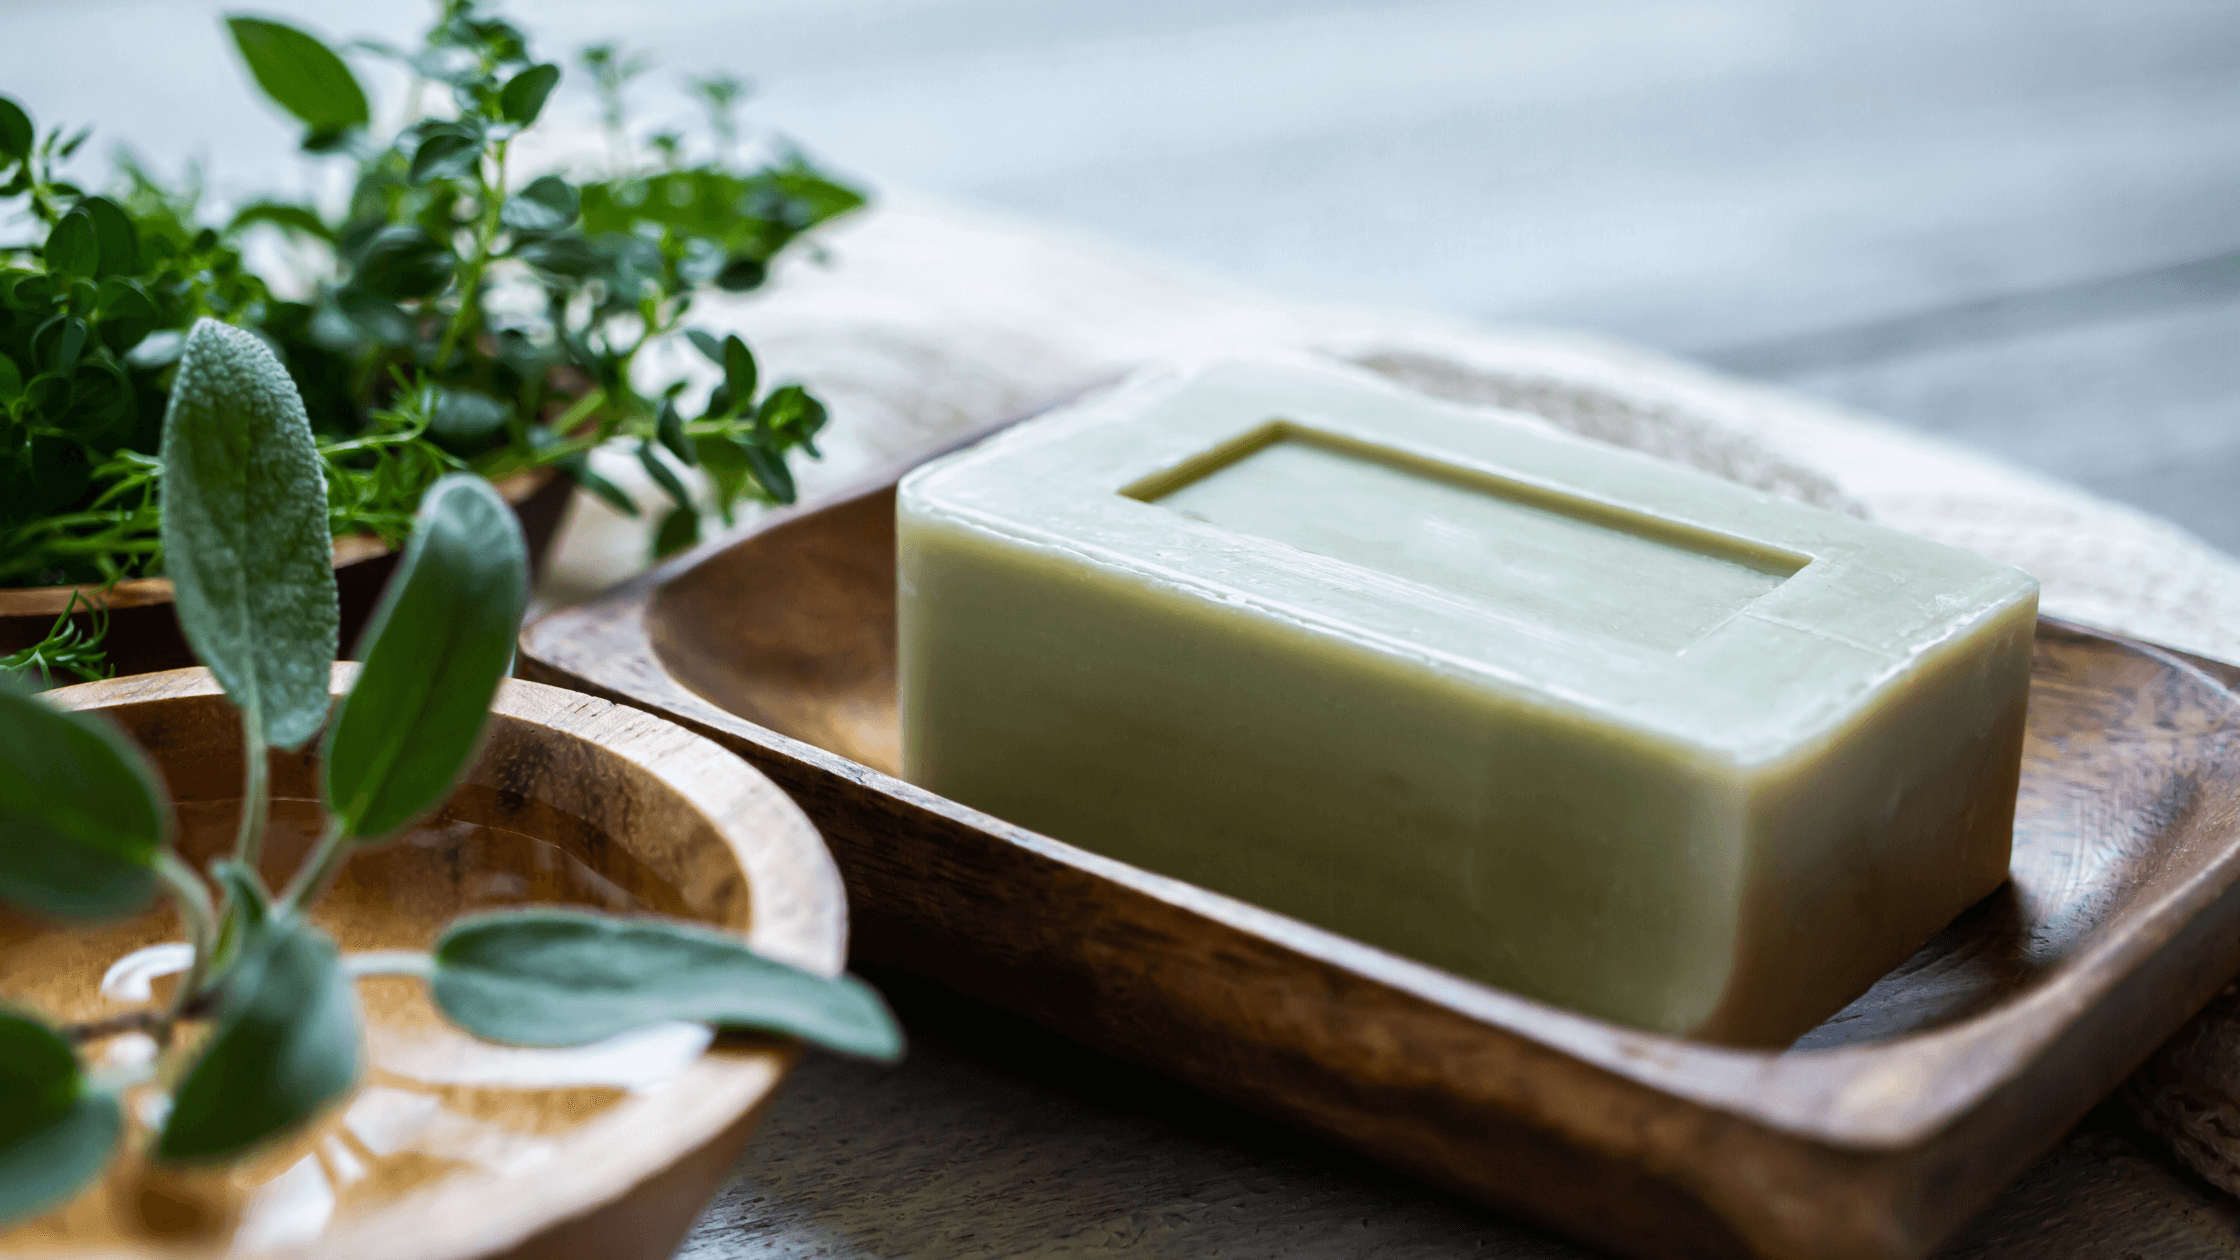 Shikakai Soap Benefits For Hair And Skin | Top Brands To Know